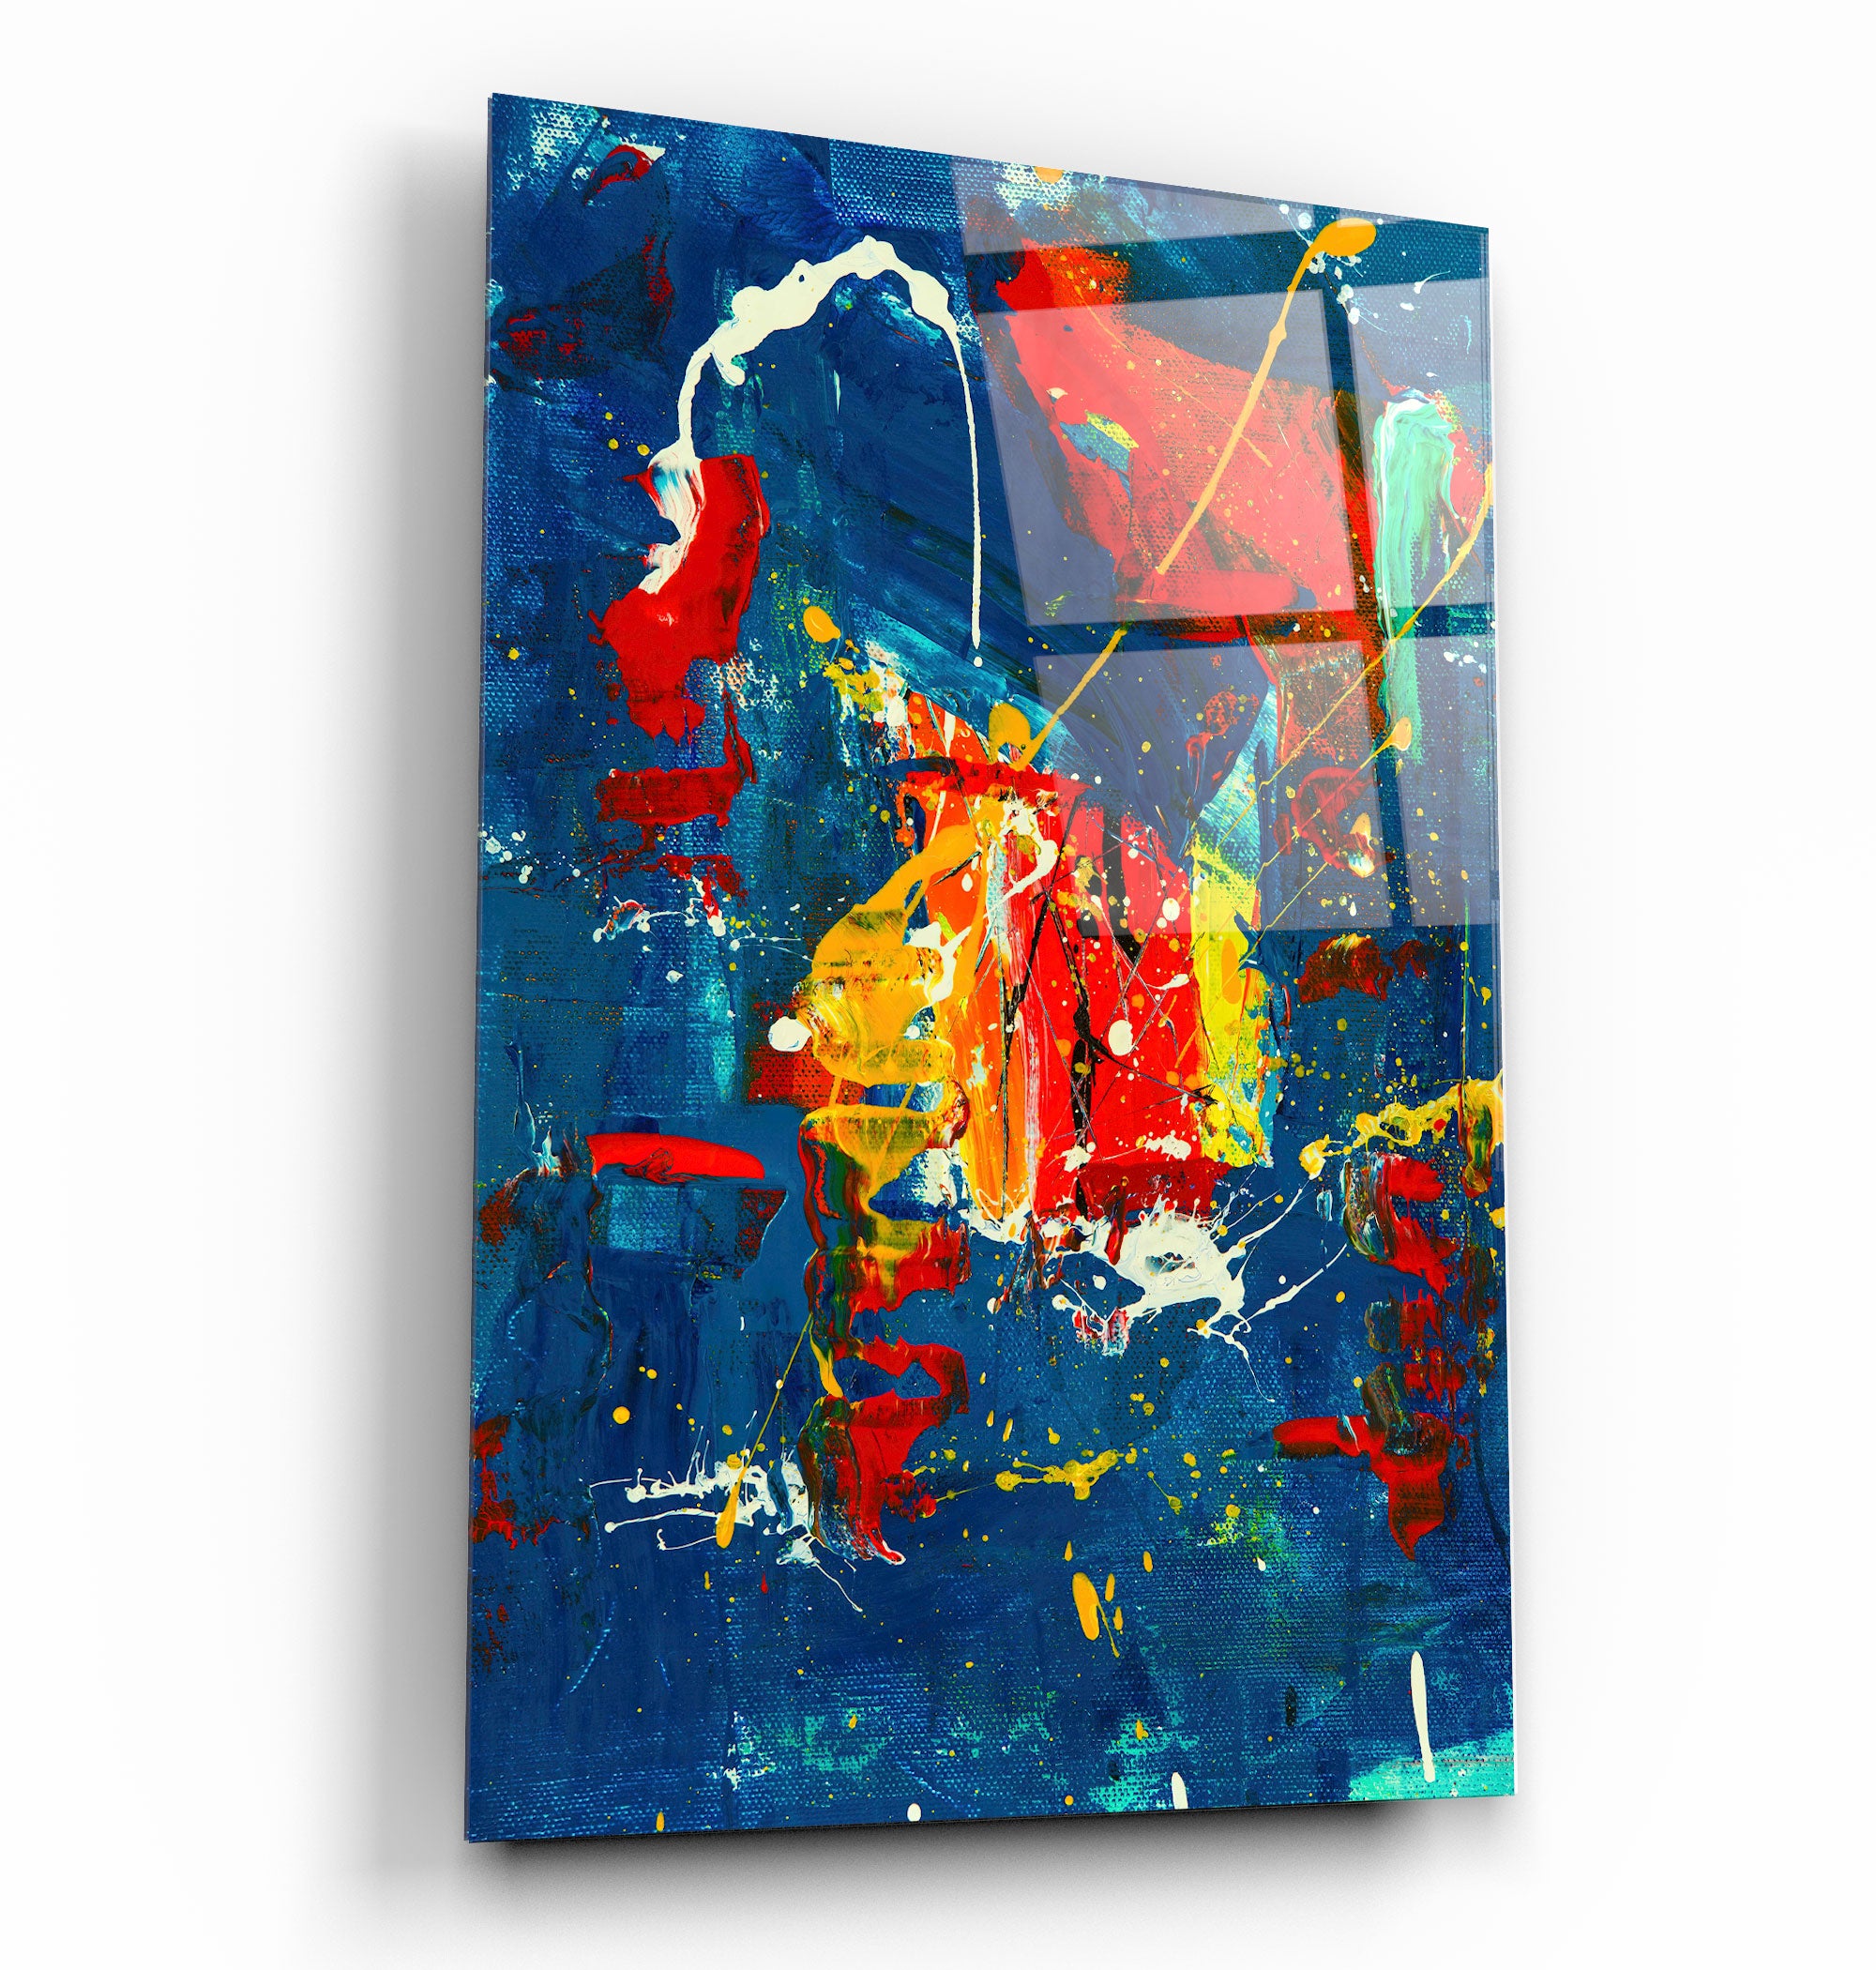 ・"Oil Painting - Abstract"・Designer's Collection Glass Wall Art